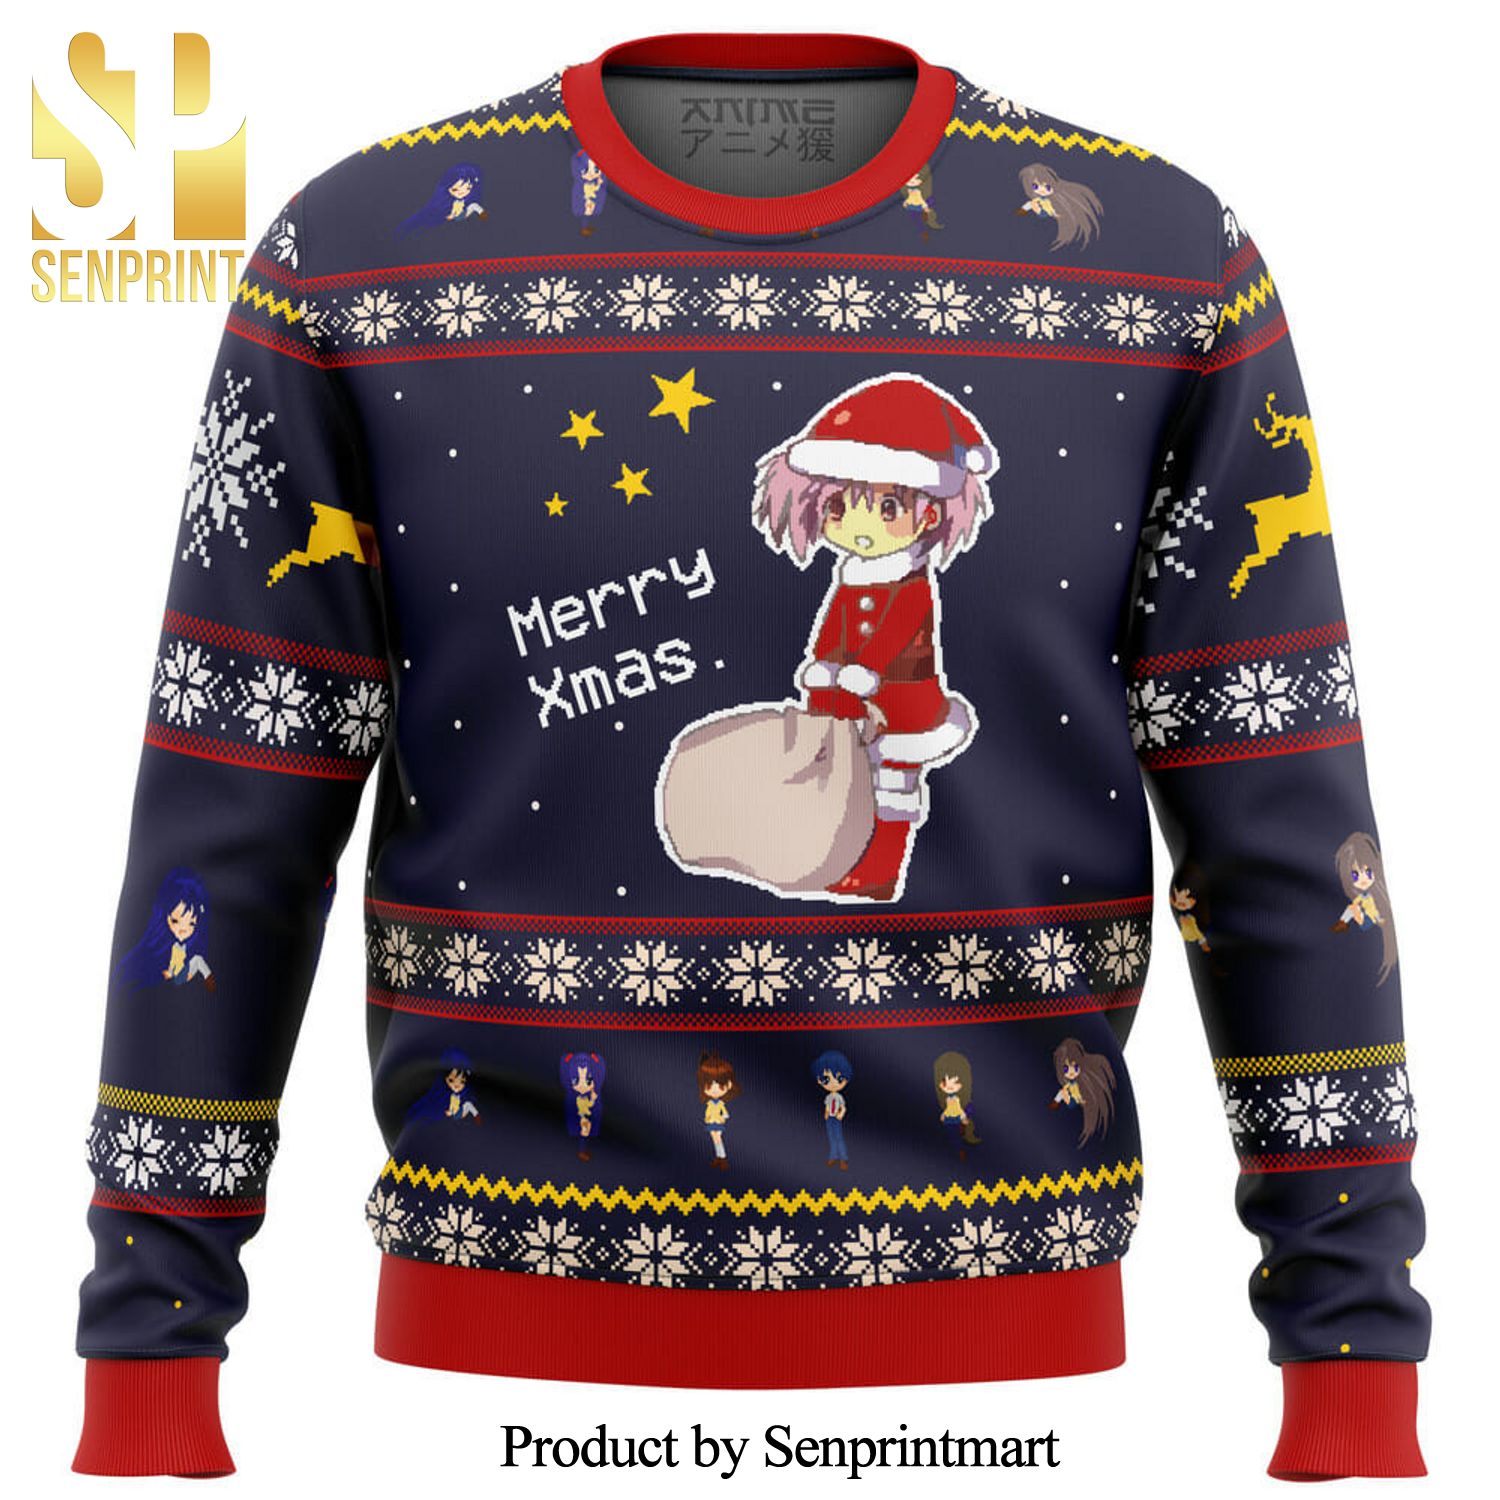 Clannad Merry Xmas Manga Anime Knitted Ugly Christmas Sweater